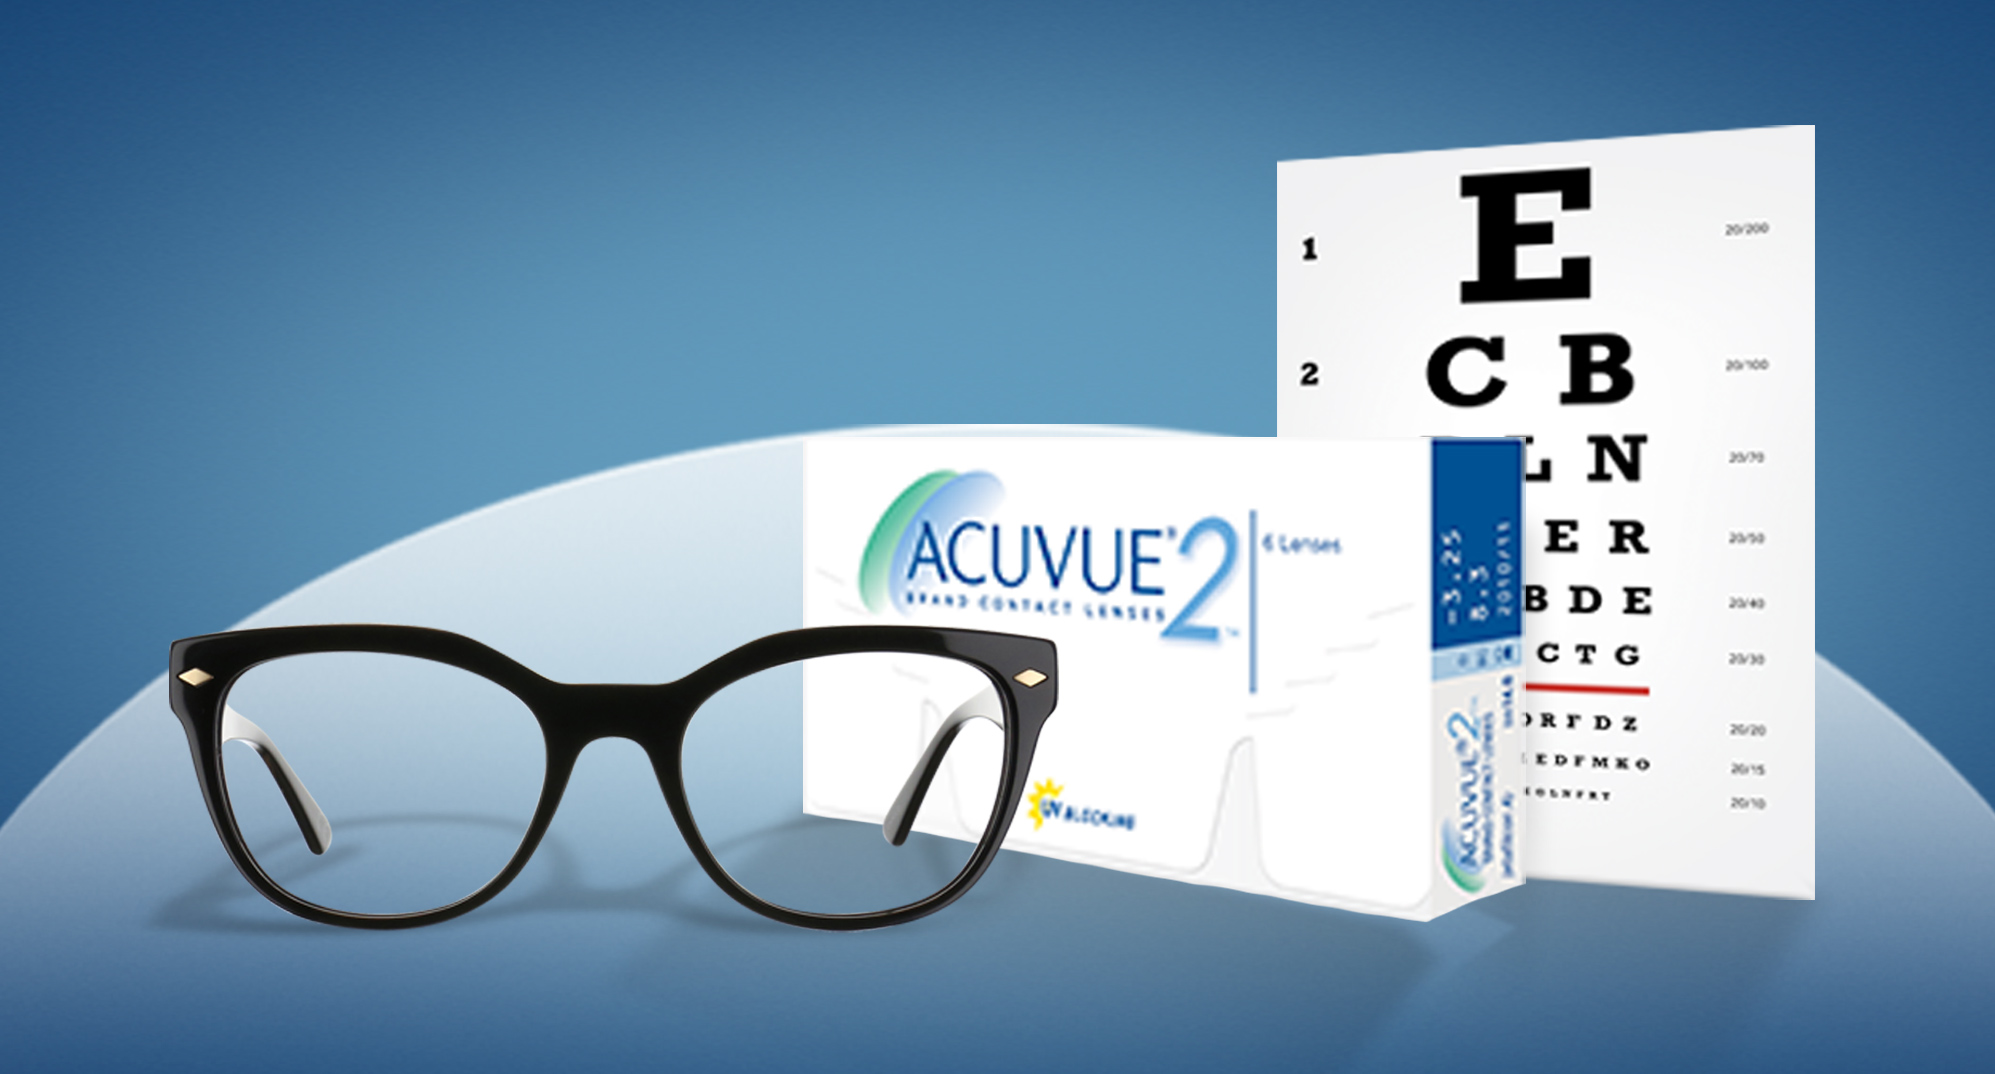 Pair of eyeglasses, box of contacts and Snellen chart